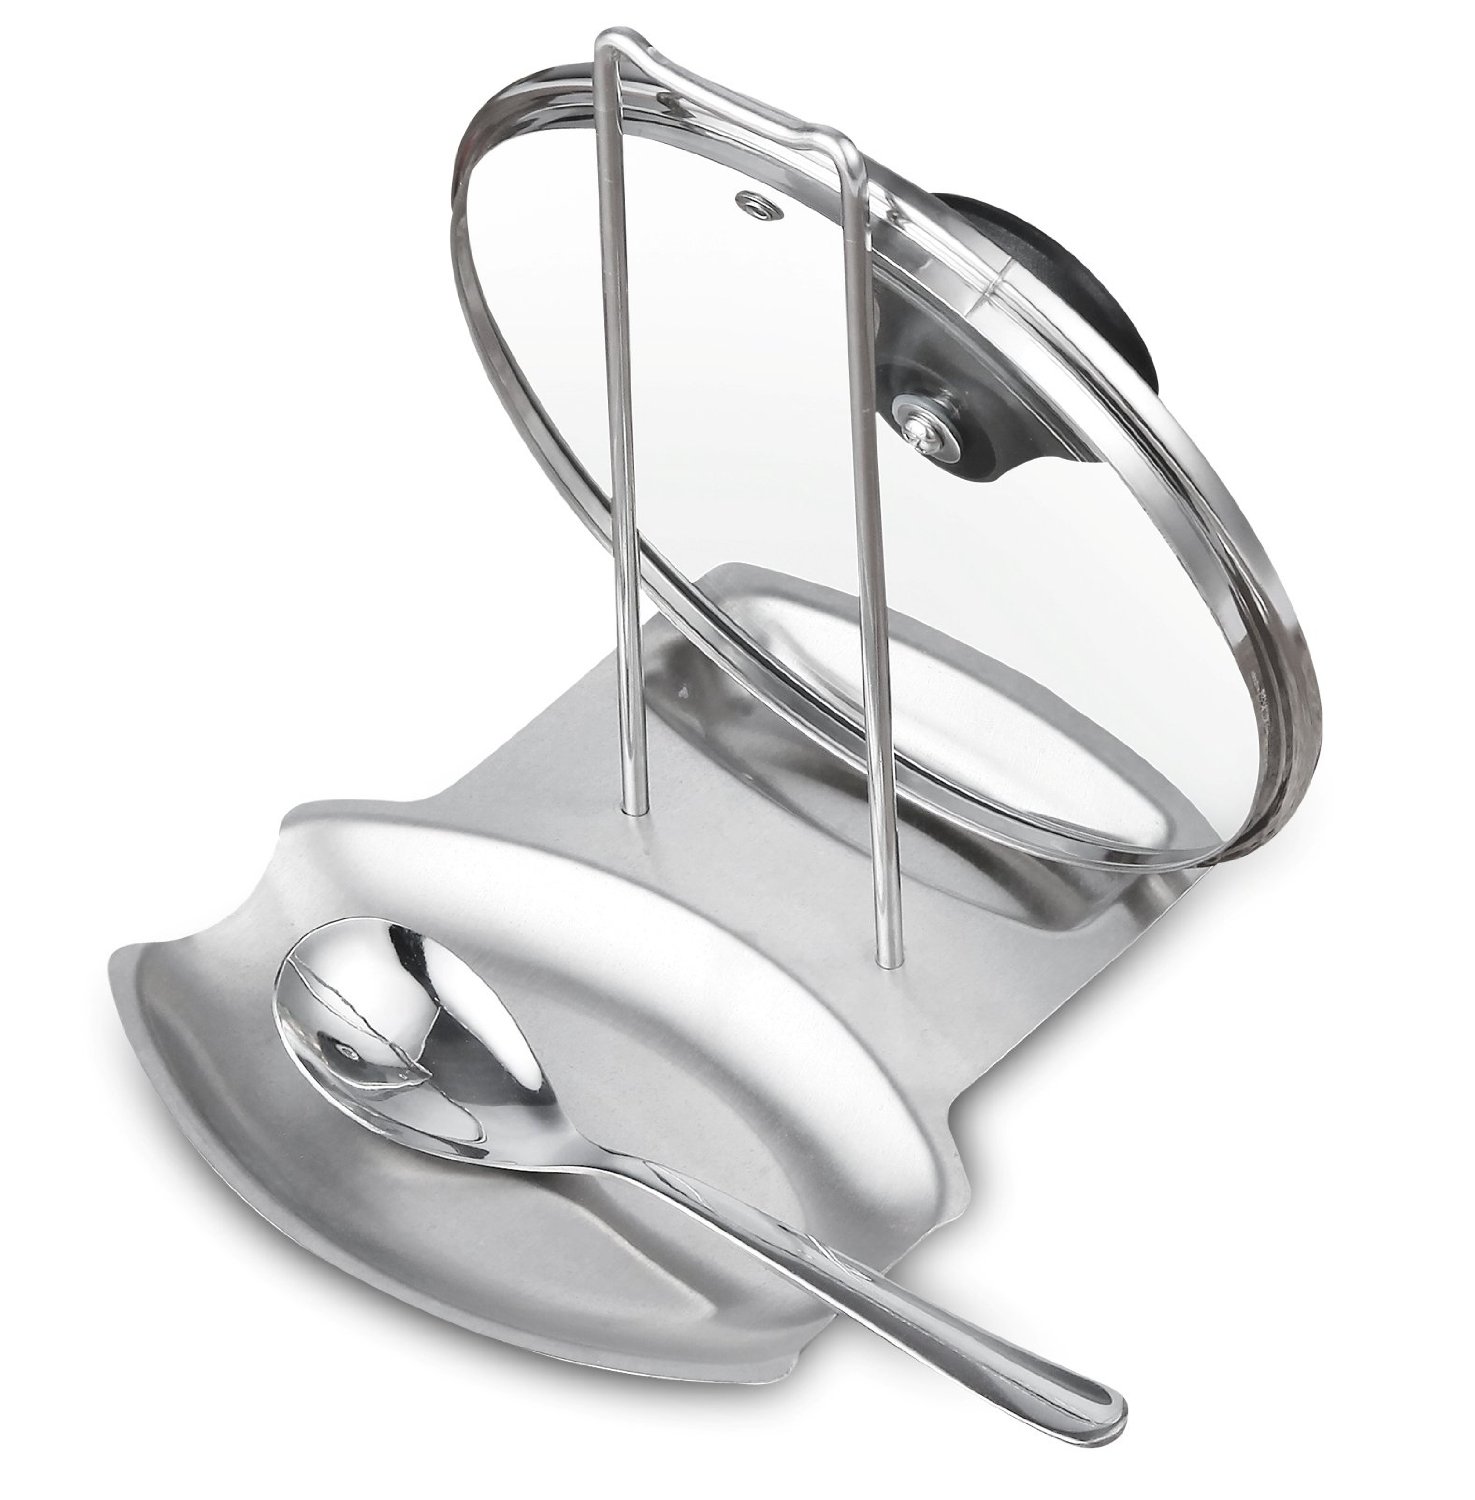 Cook N Home Stainless Steel Spoon and Lid Rest – Just $8.93!